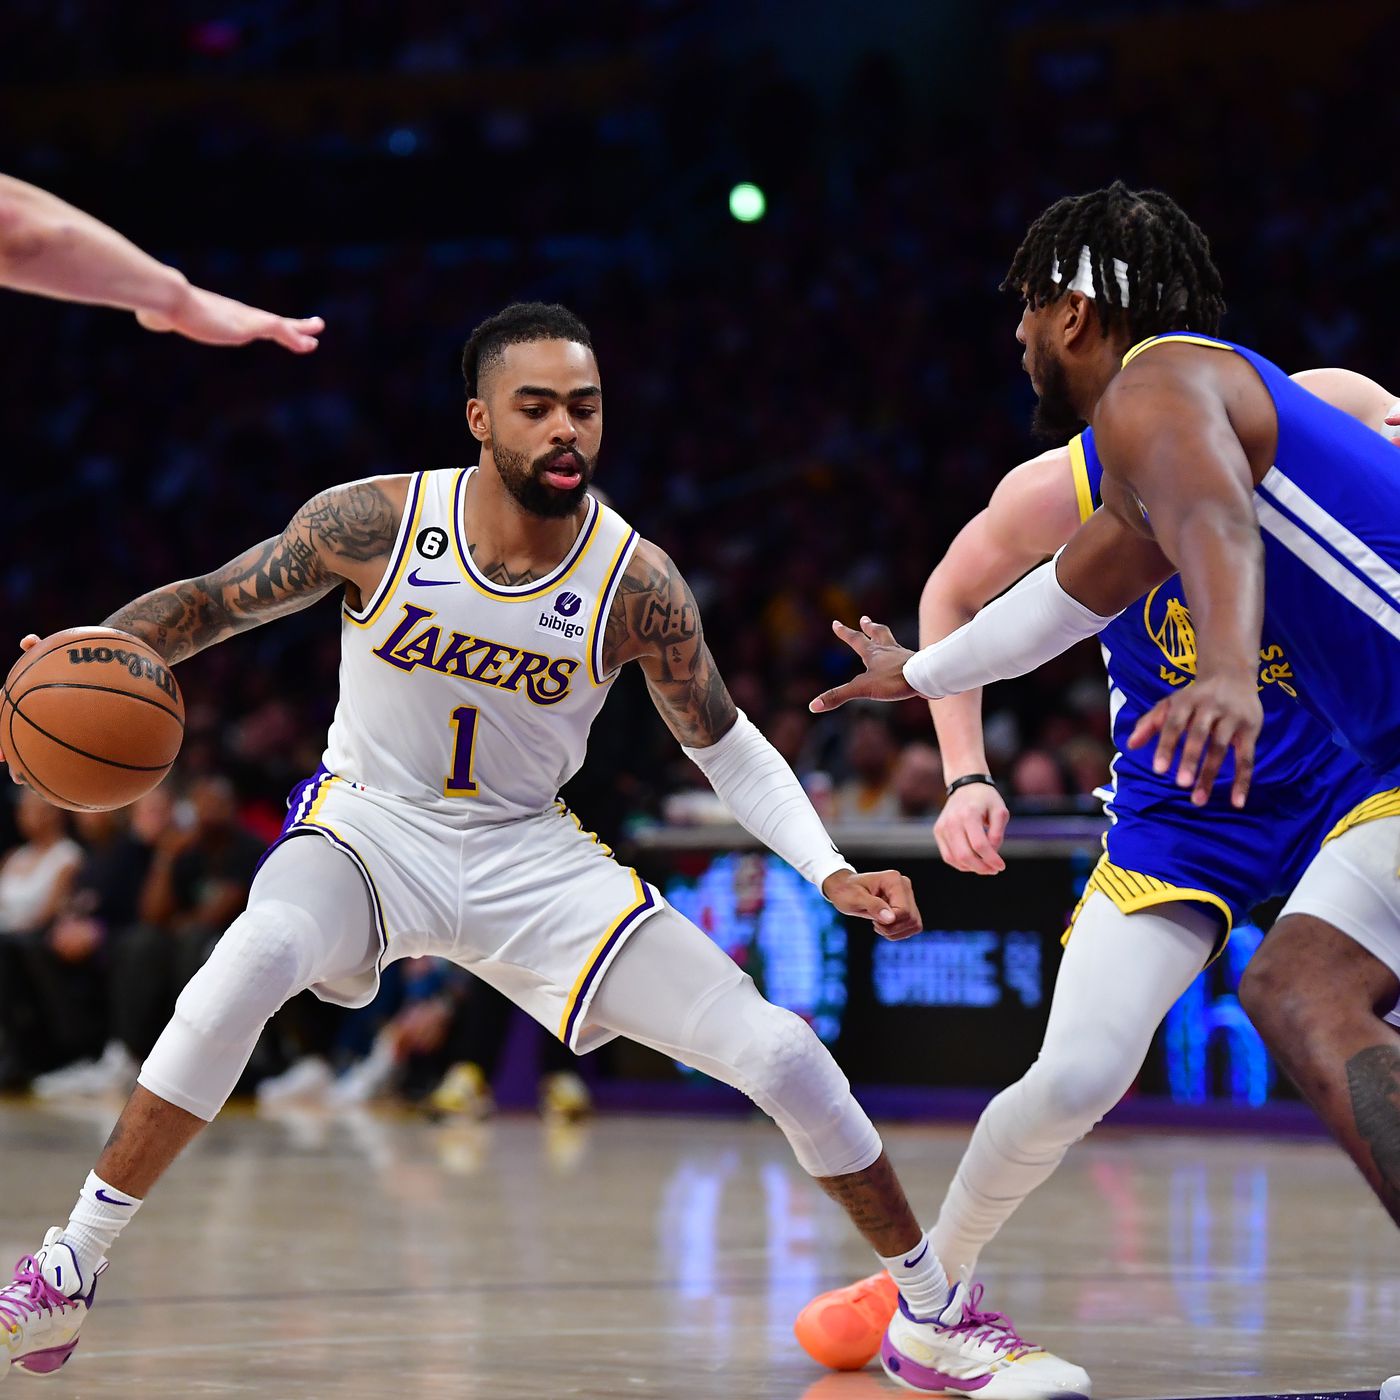 Lakers vs. Warriors Final Score: L.A. protects home court, now up 2-1 -  Silver Screen and Roll